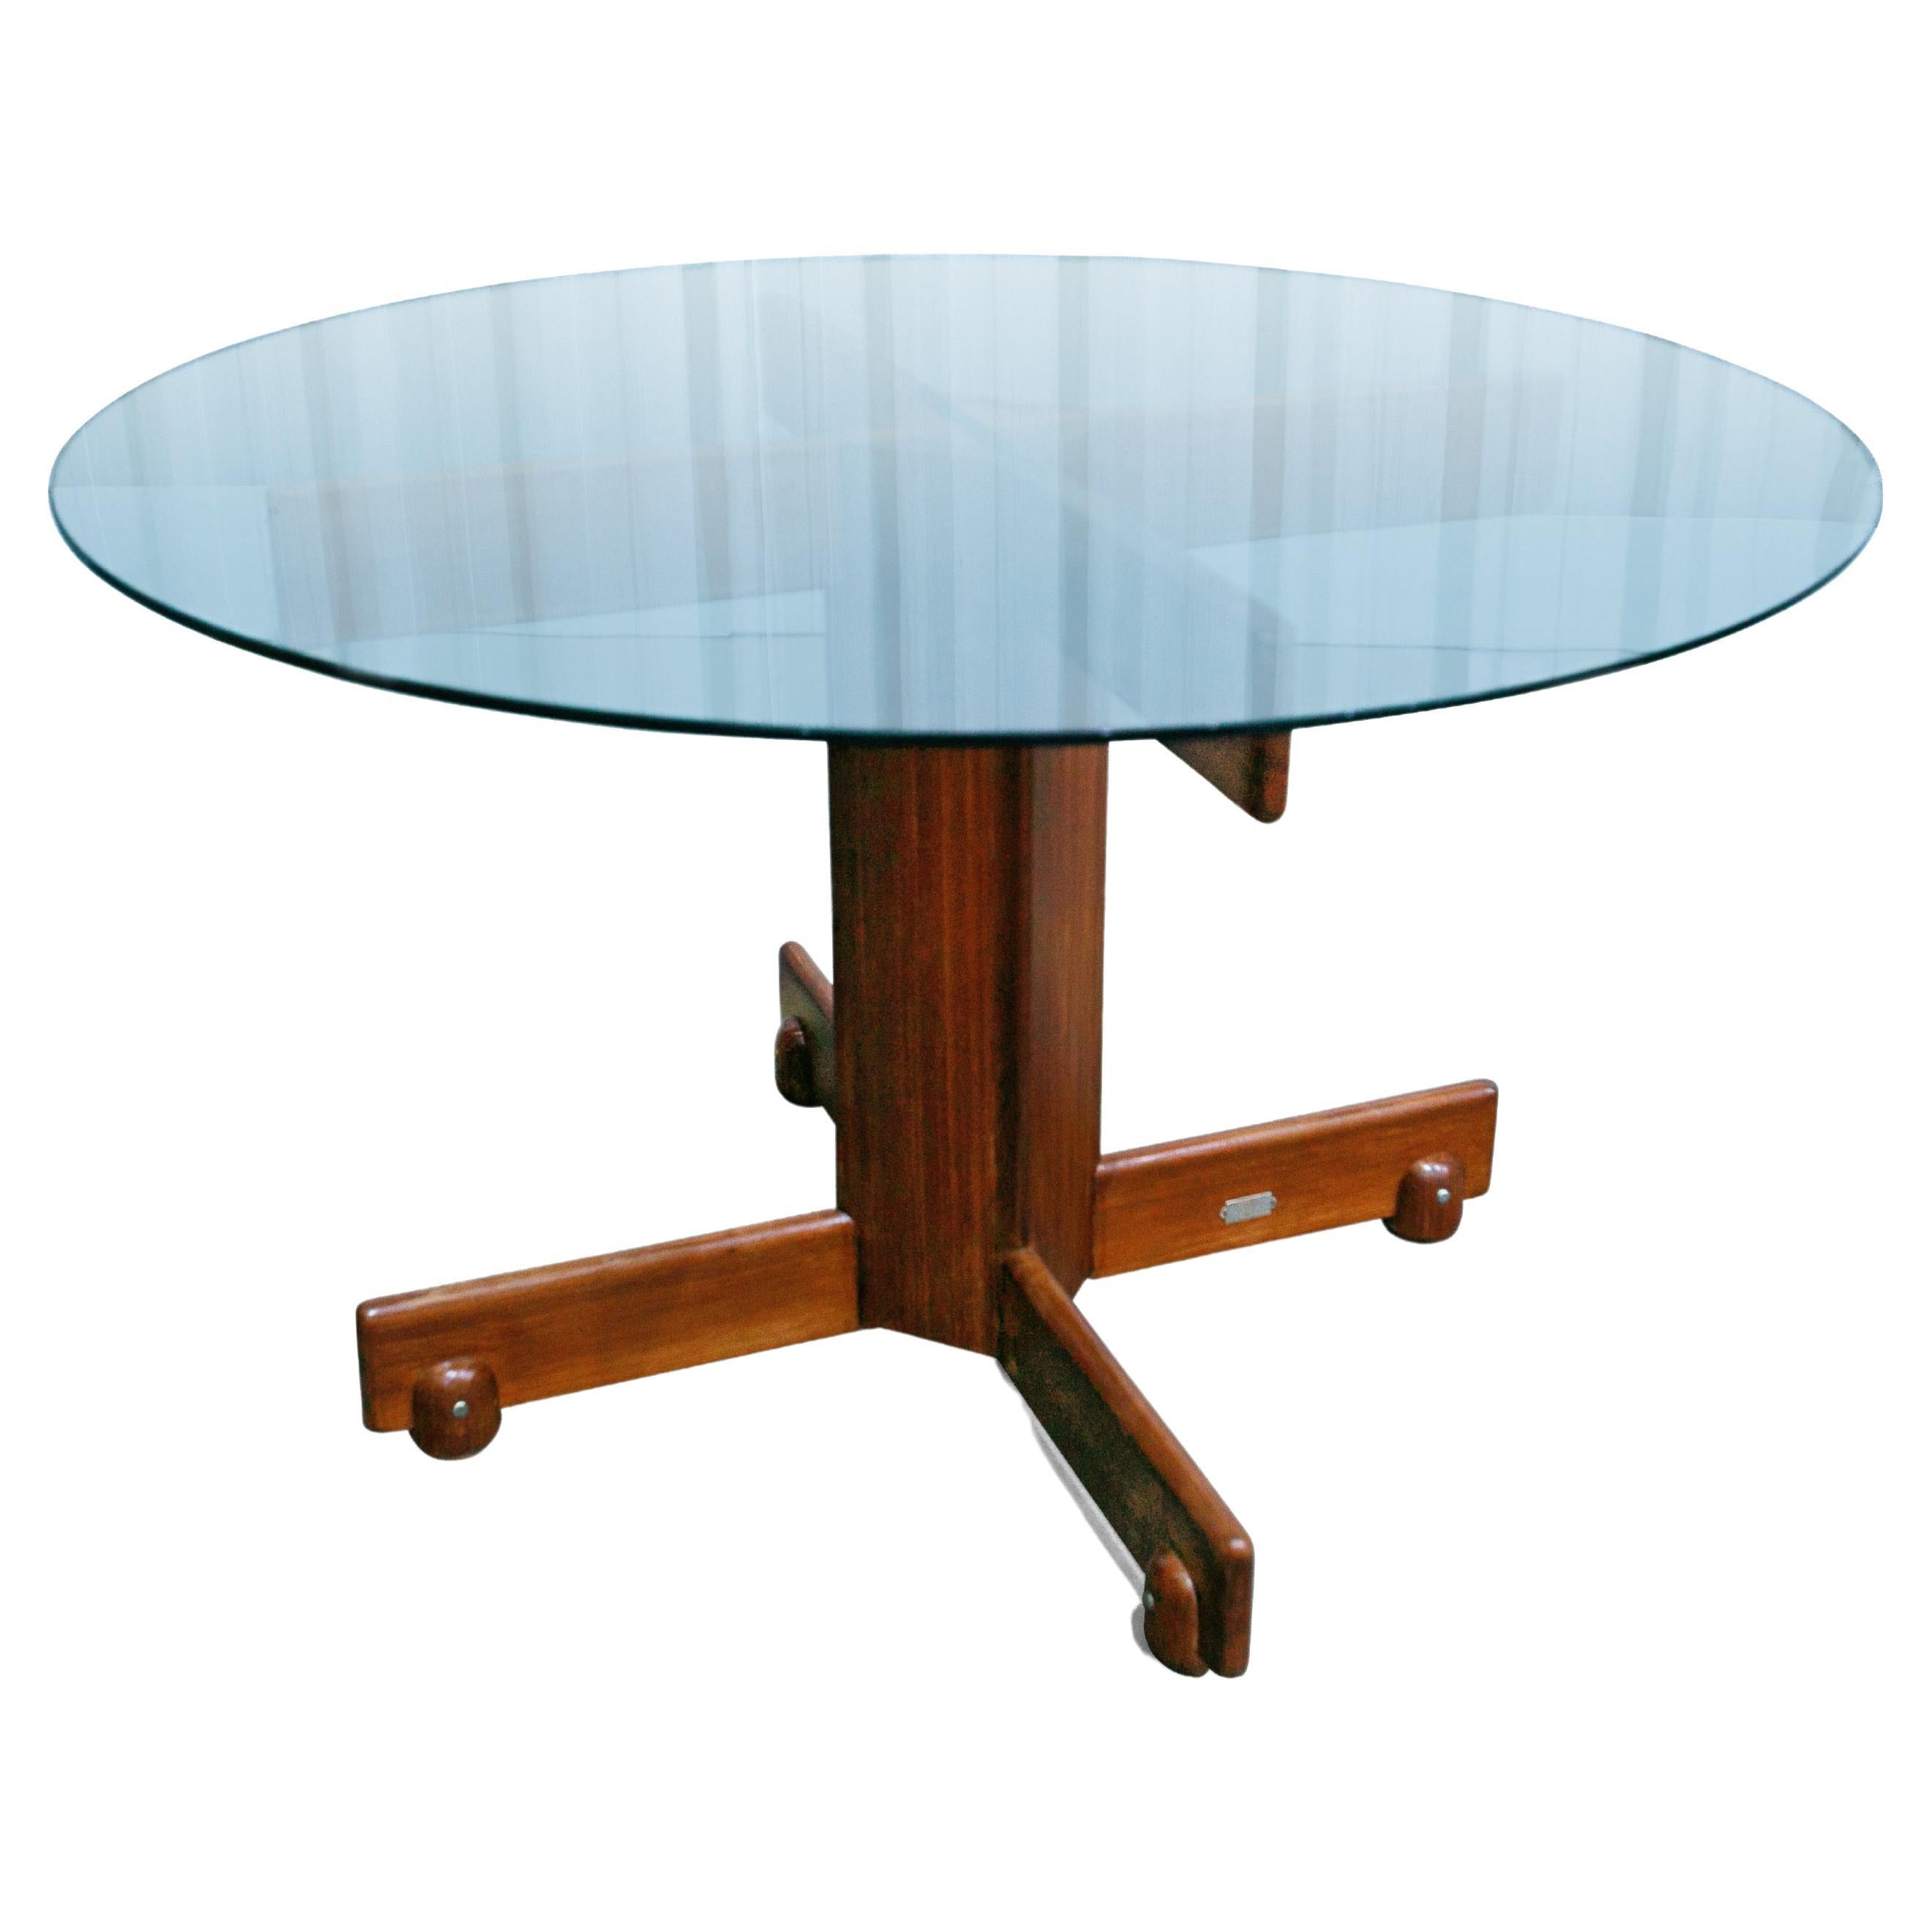 “Alex” Dining Table in Hardwood & Glass by Sergio Rodrigues, 1960s